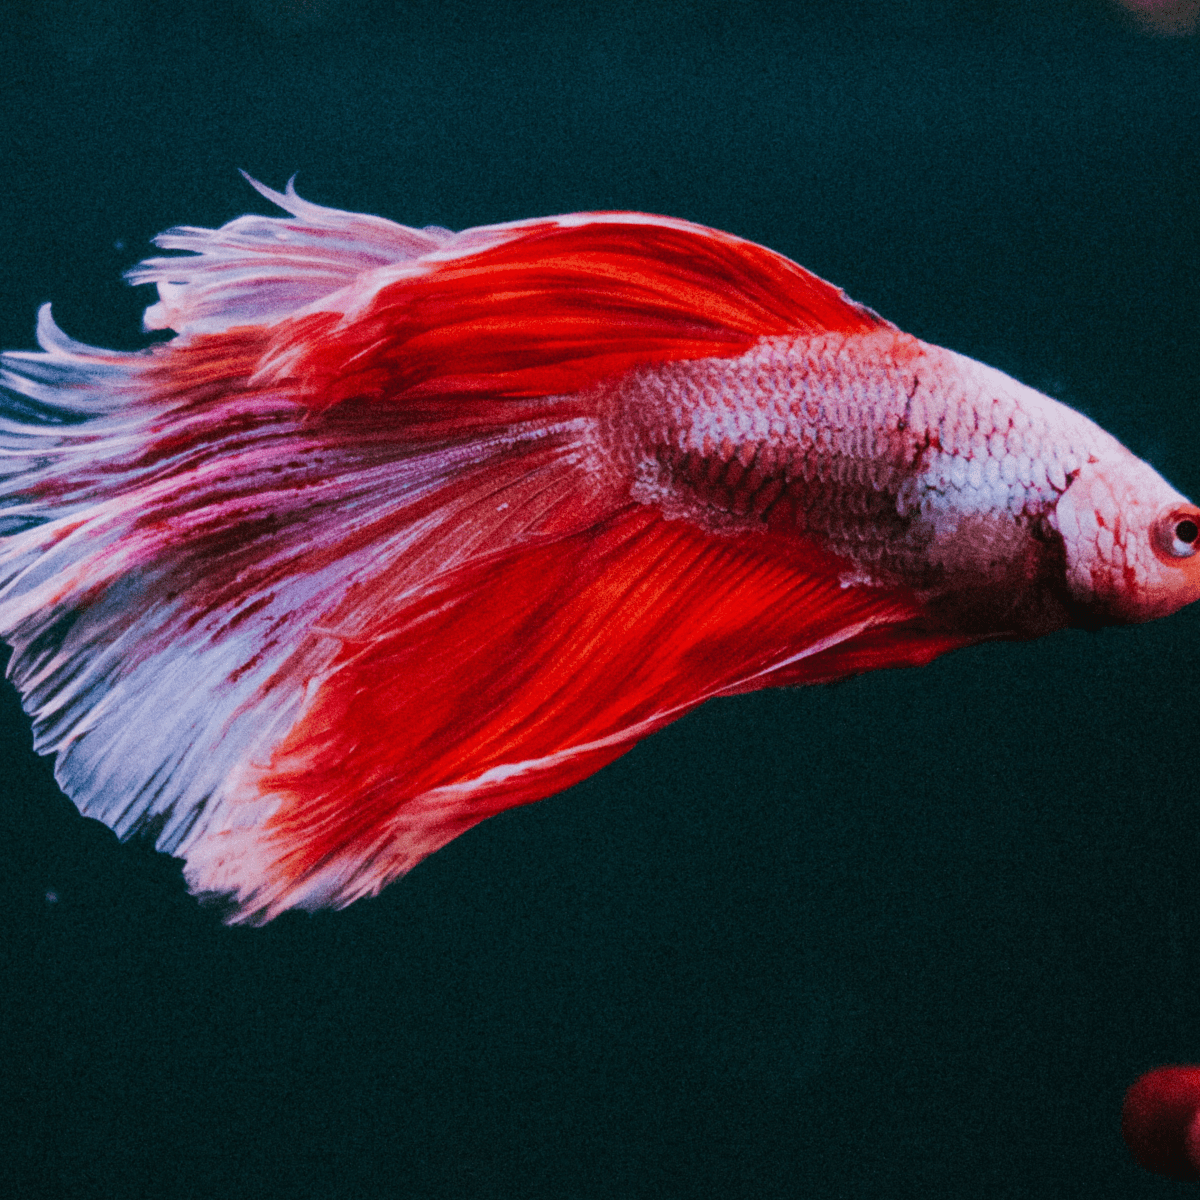 Do Betta Fish Need A Heater And Filter In Their Tank? - Pethelpful